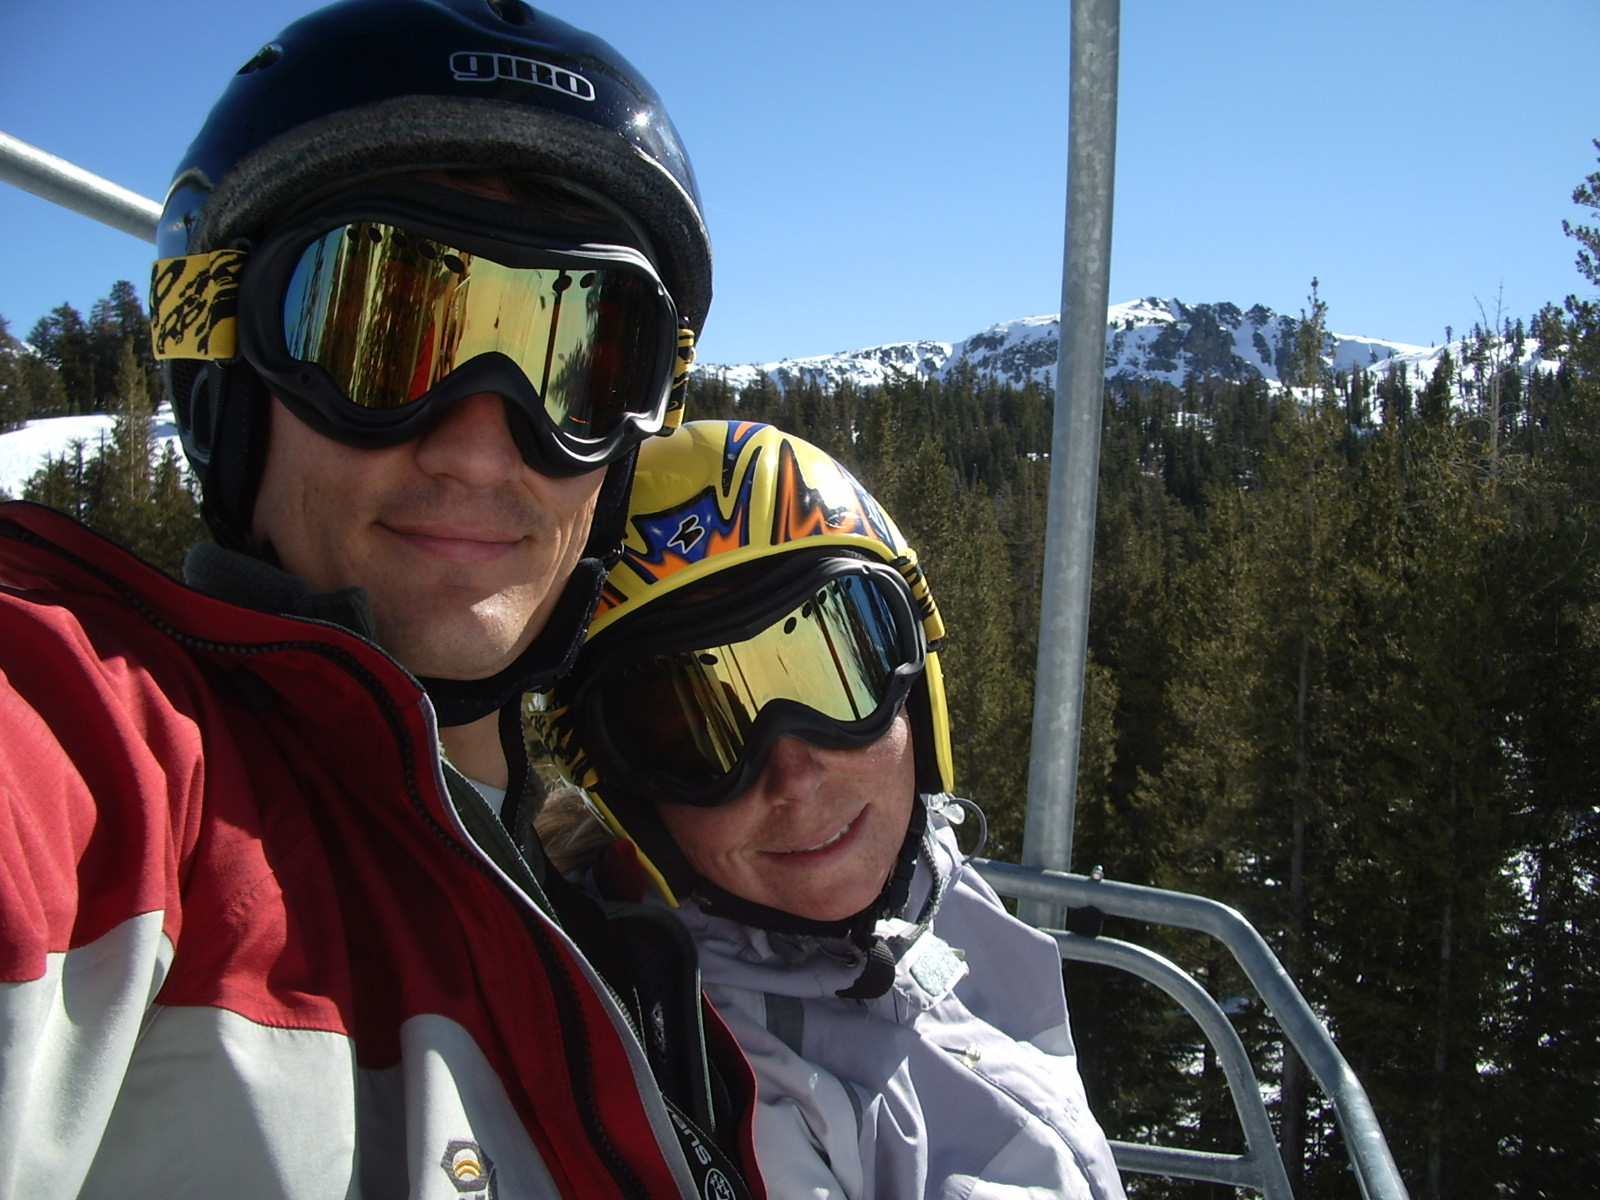 [Skiing+and+La+Jolla+Guest+House+002.jpg]